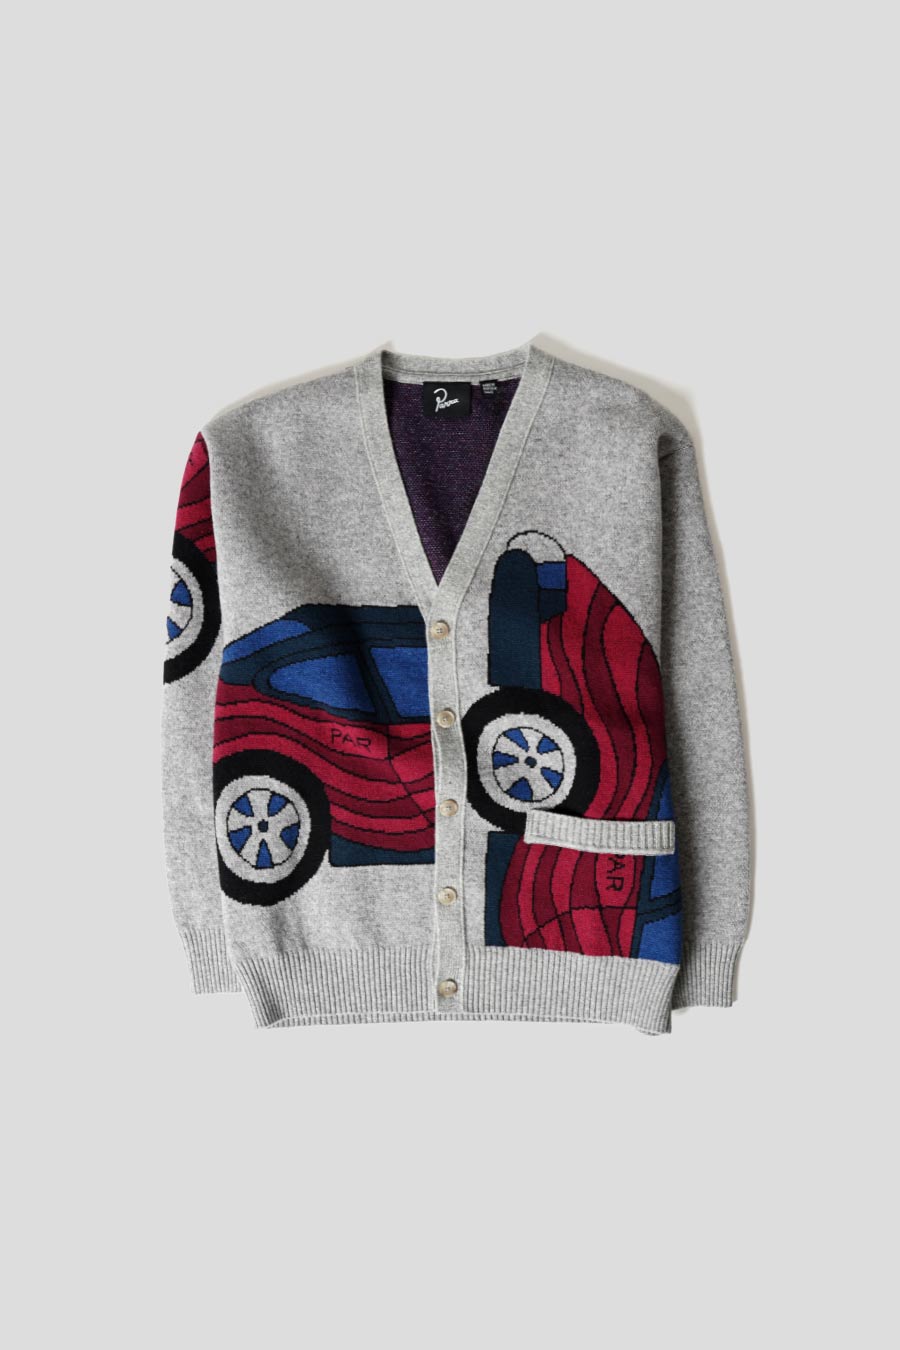 BY PARRA - NO PARKING GREY KNITTED CARDIGAN - LE LABO STORE